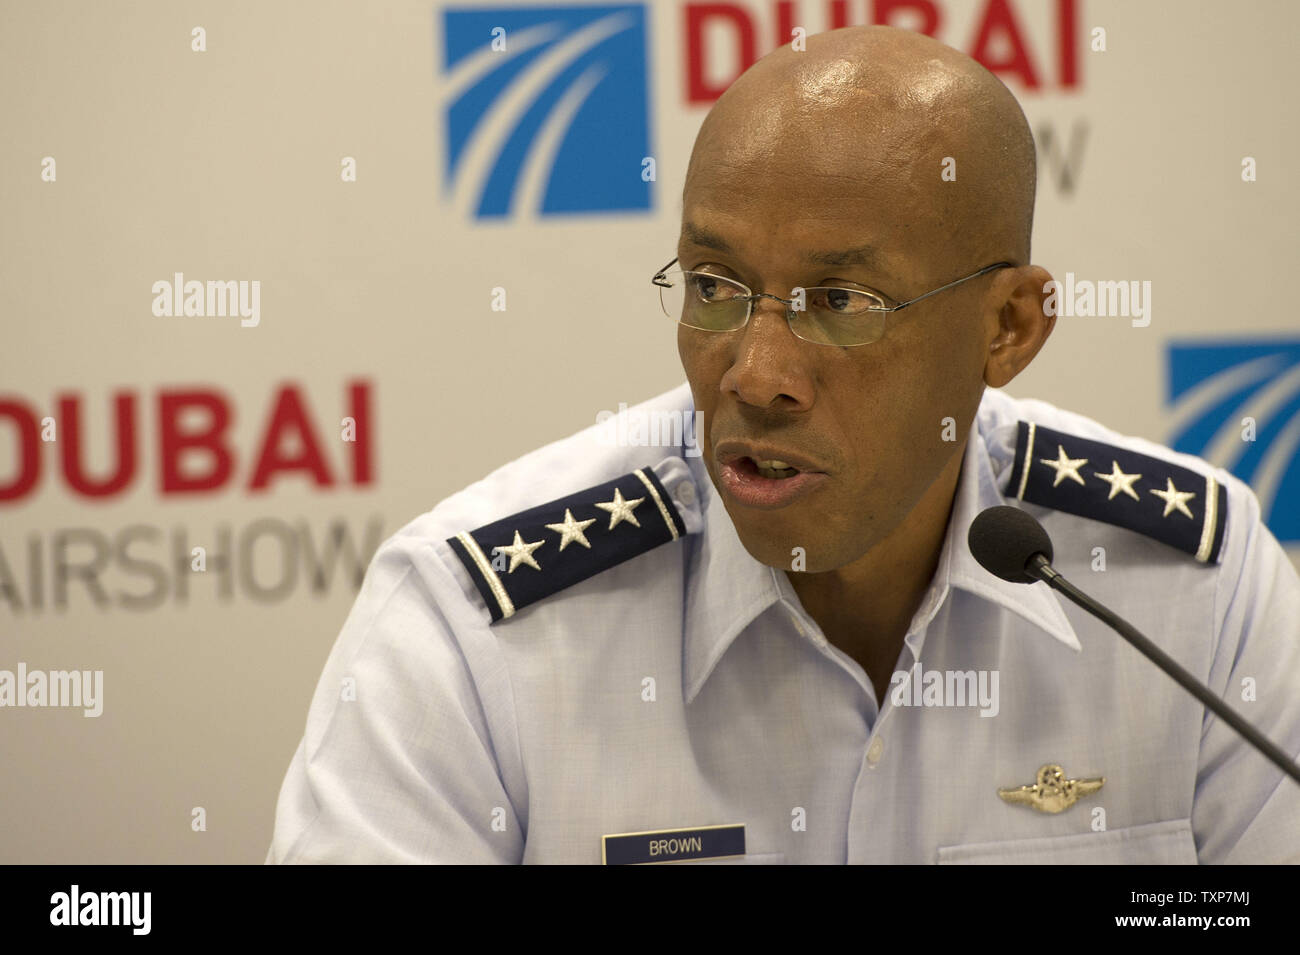 Lt. Gen. Charles Q. Brown Jr., U.S. Air Forces Central Command commander, answers questions during a press conference at the 2015 Dubai Air Show on November 10, 2015 in Dubai, UAE. The air show is a biennial event and is recognized as the premier aviation and air industry event in the Gulf and Middle East region and is one of the largest air shows in the world.   U.S. Air Force Photo by Nathan Lipscomb/UPI Stock Photo